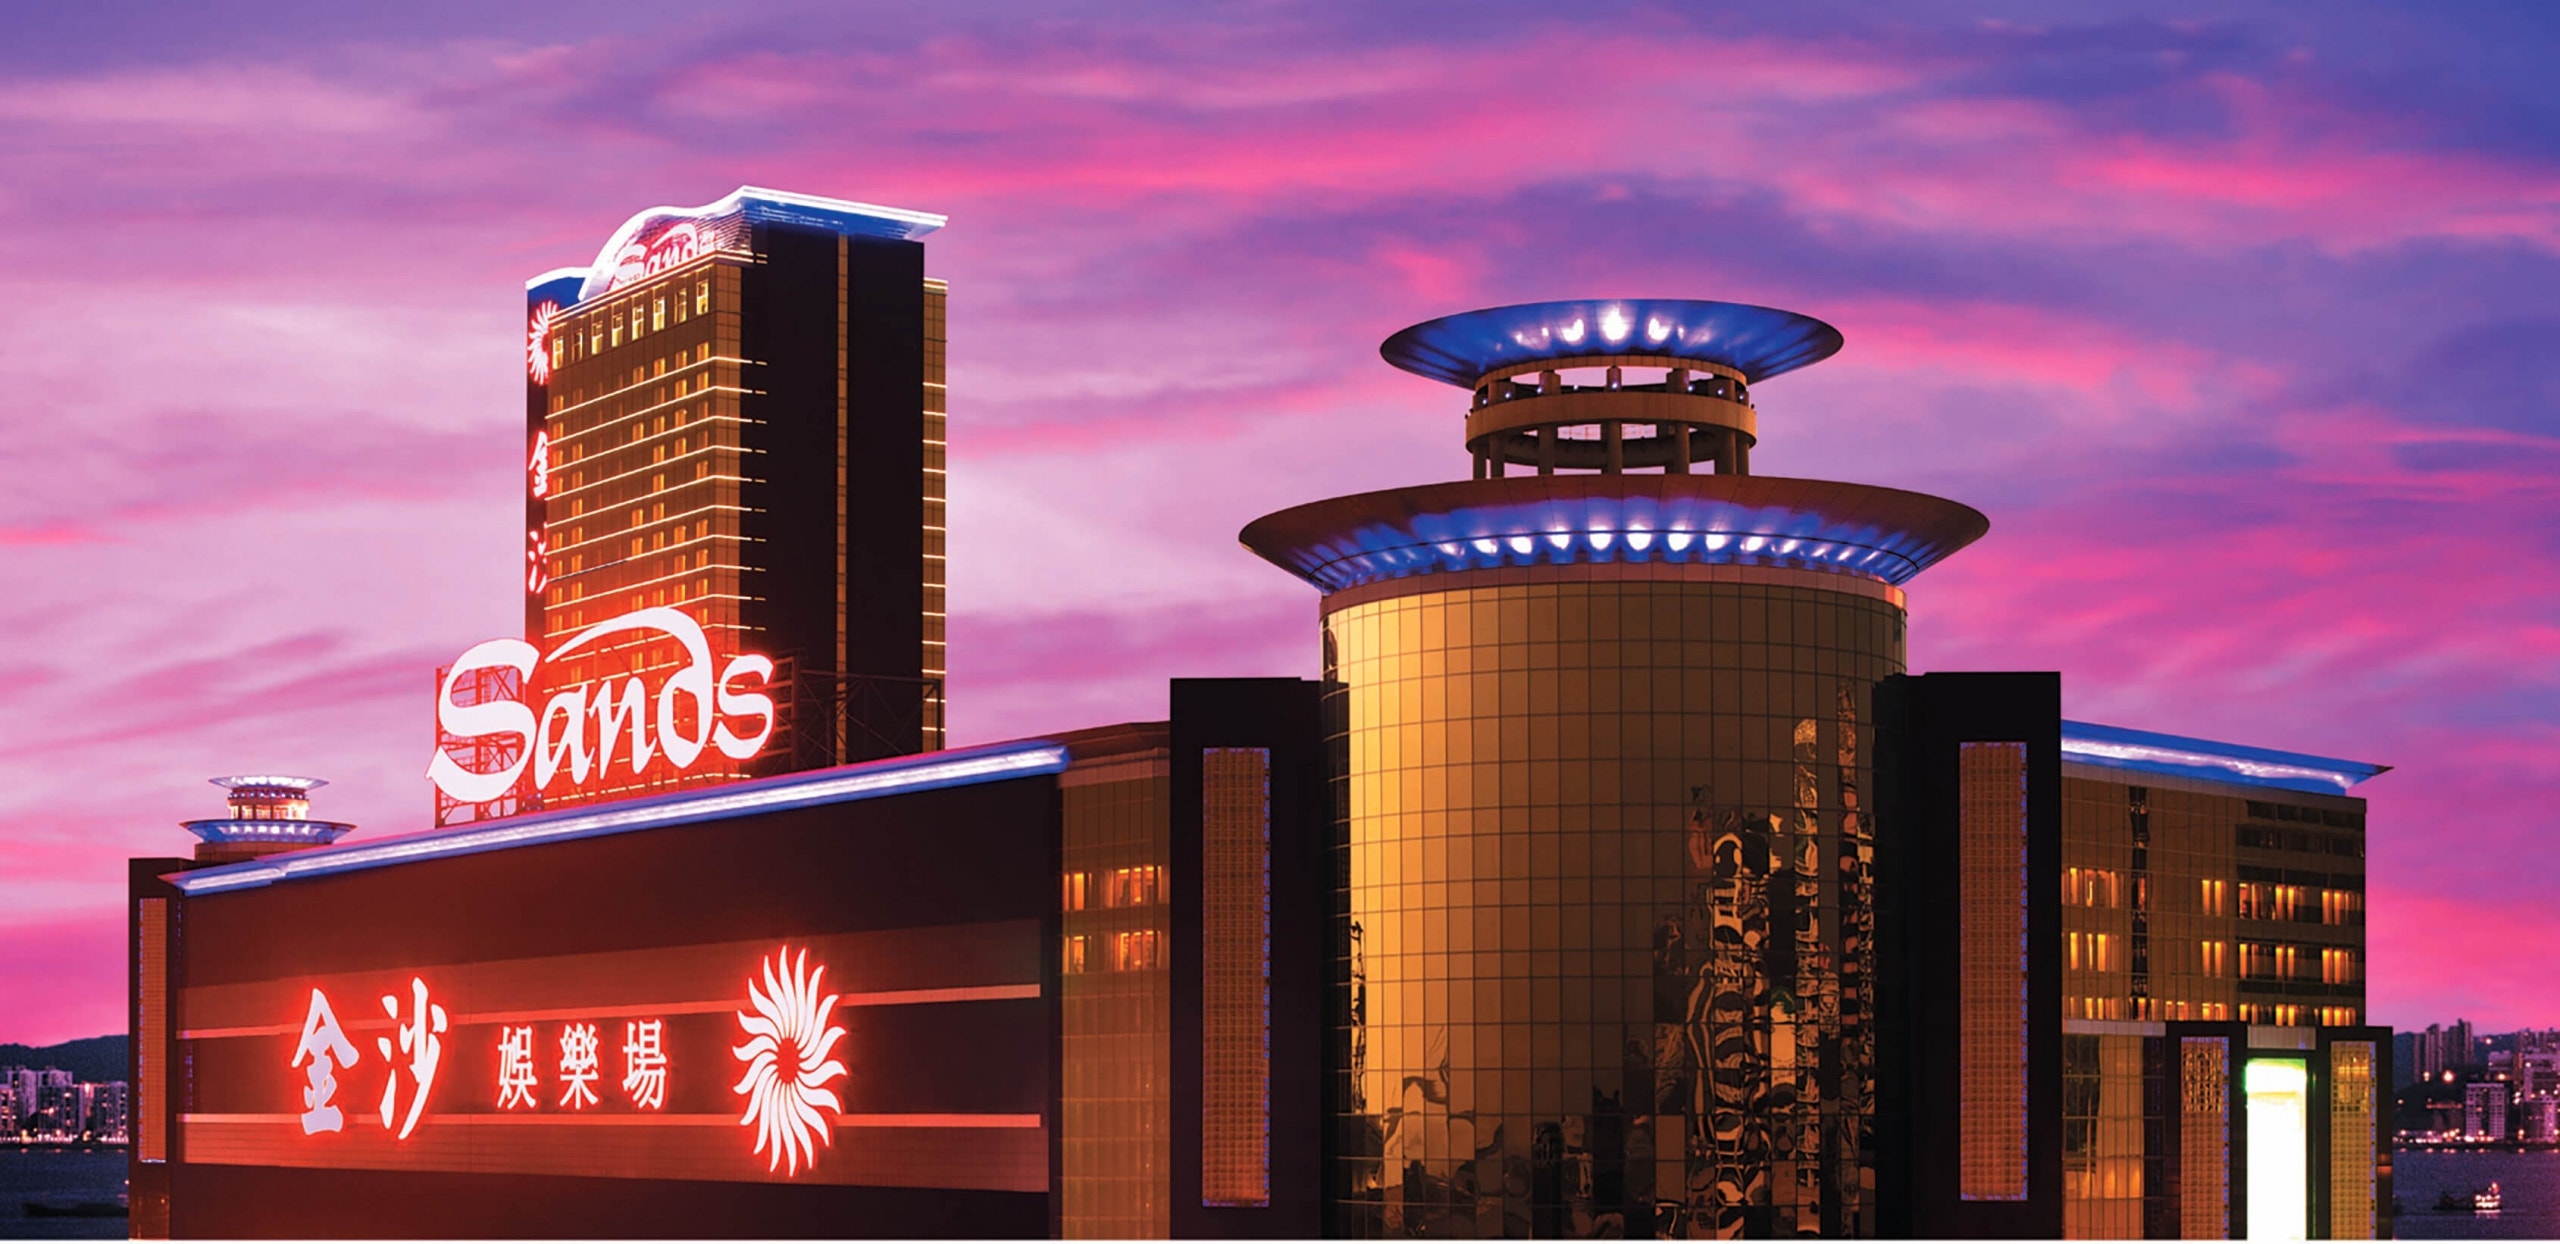 Las Vegas Sands Stock Is Sliding Today: What's Going On?